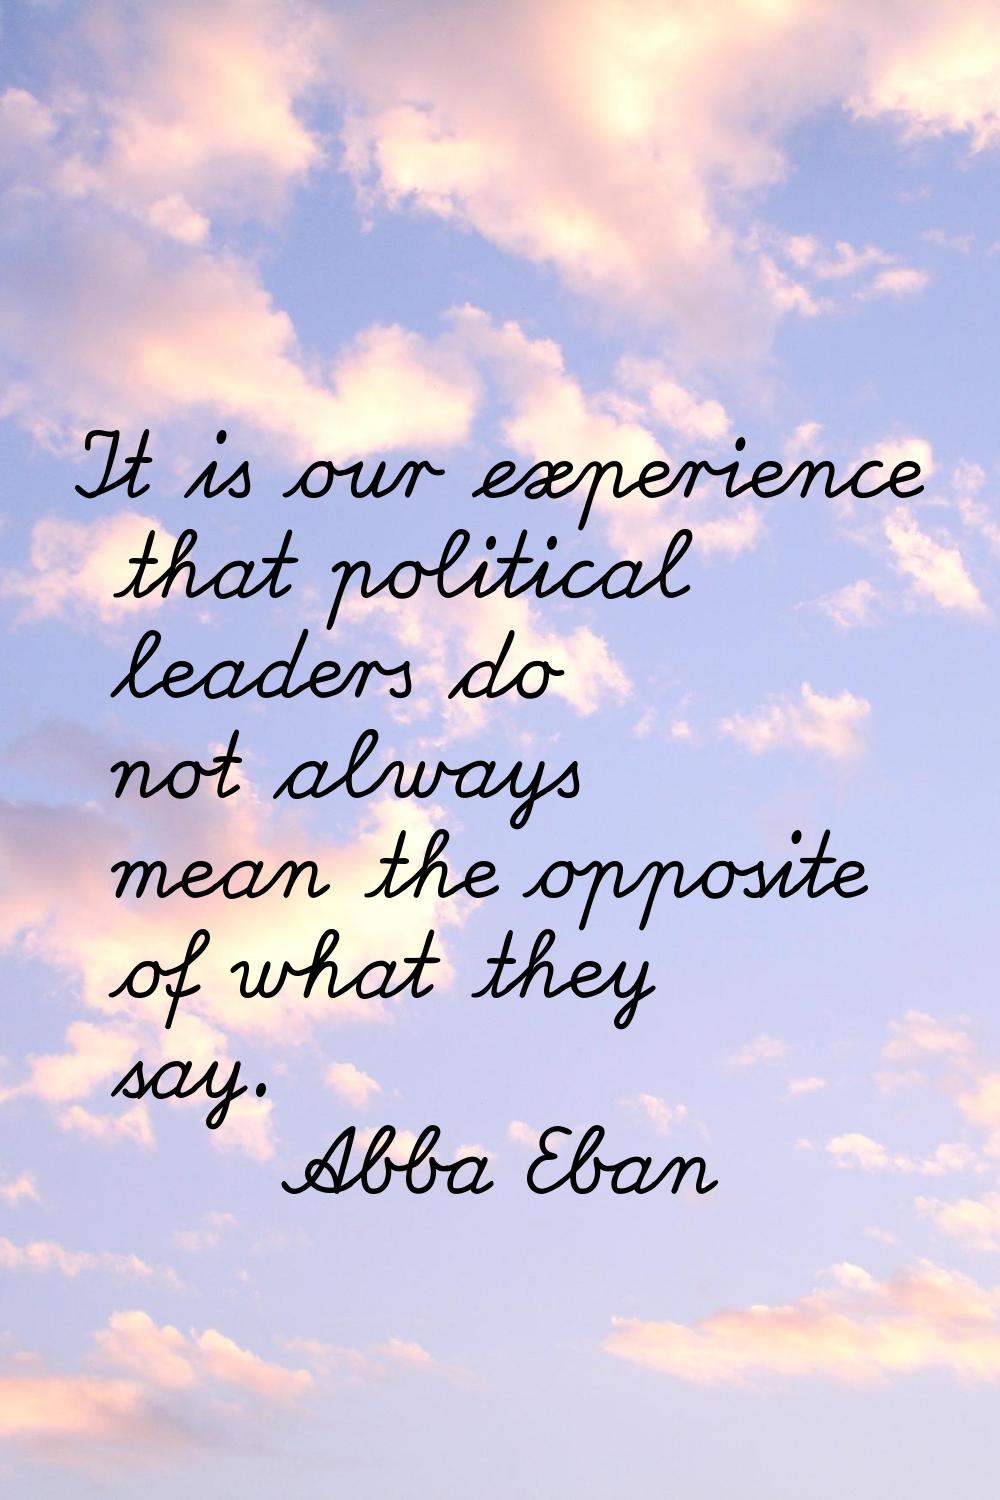 It is our experience that political leaders do not always mean the opposite of what they say.